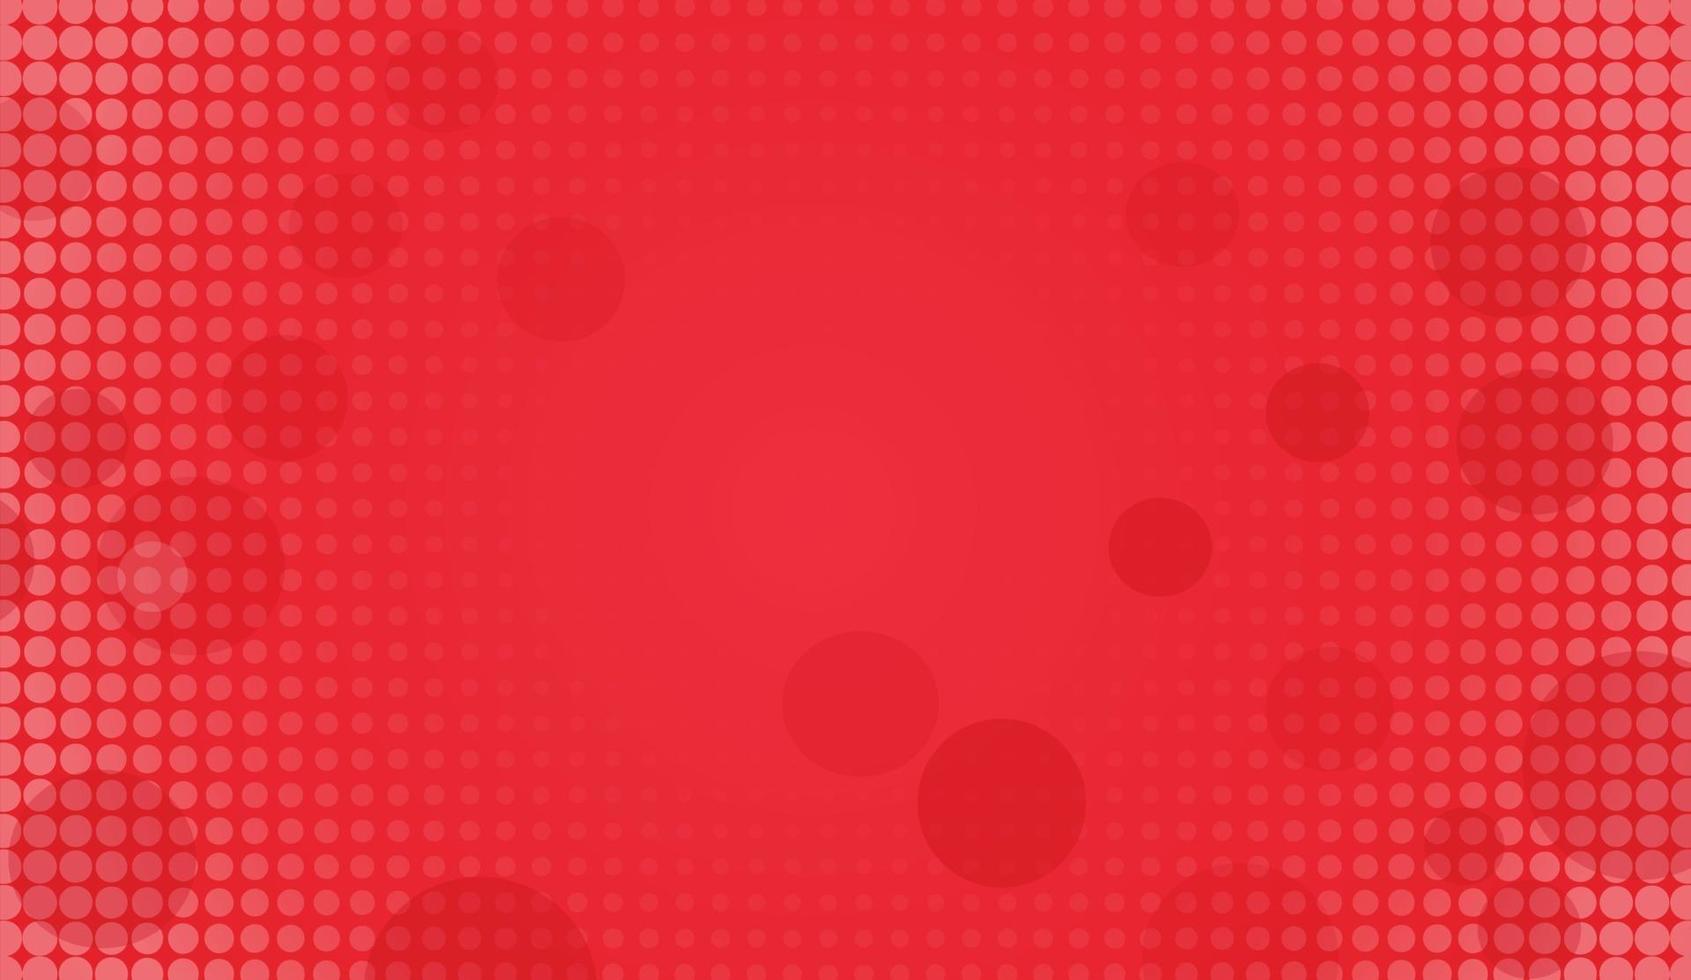 Abstract Red circle halftone background vector